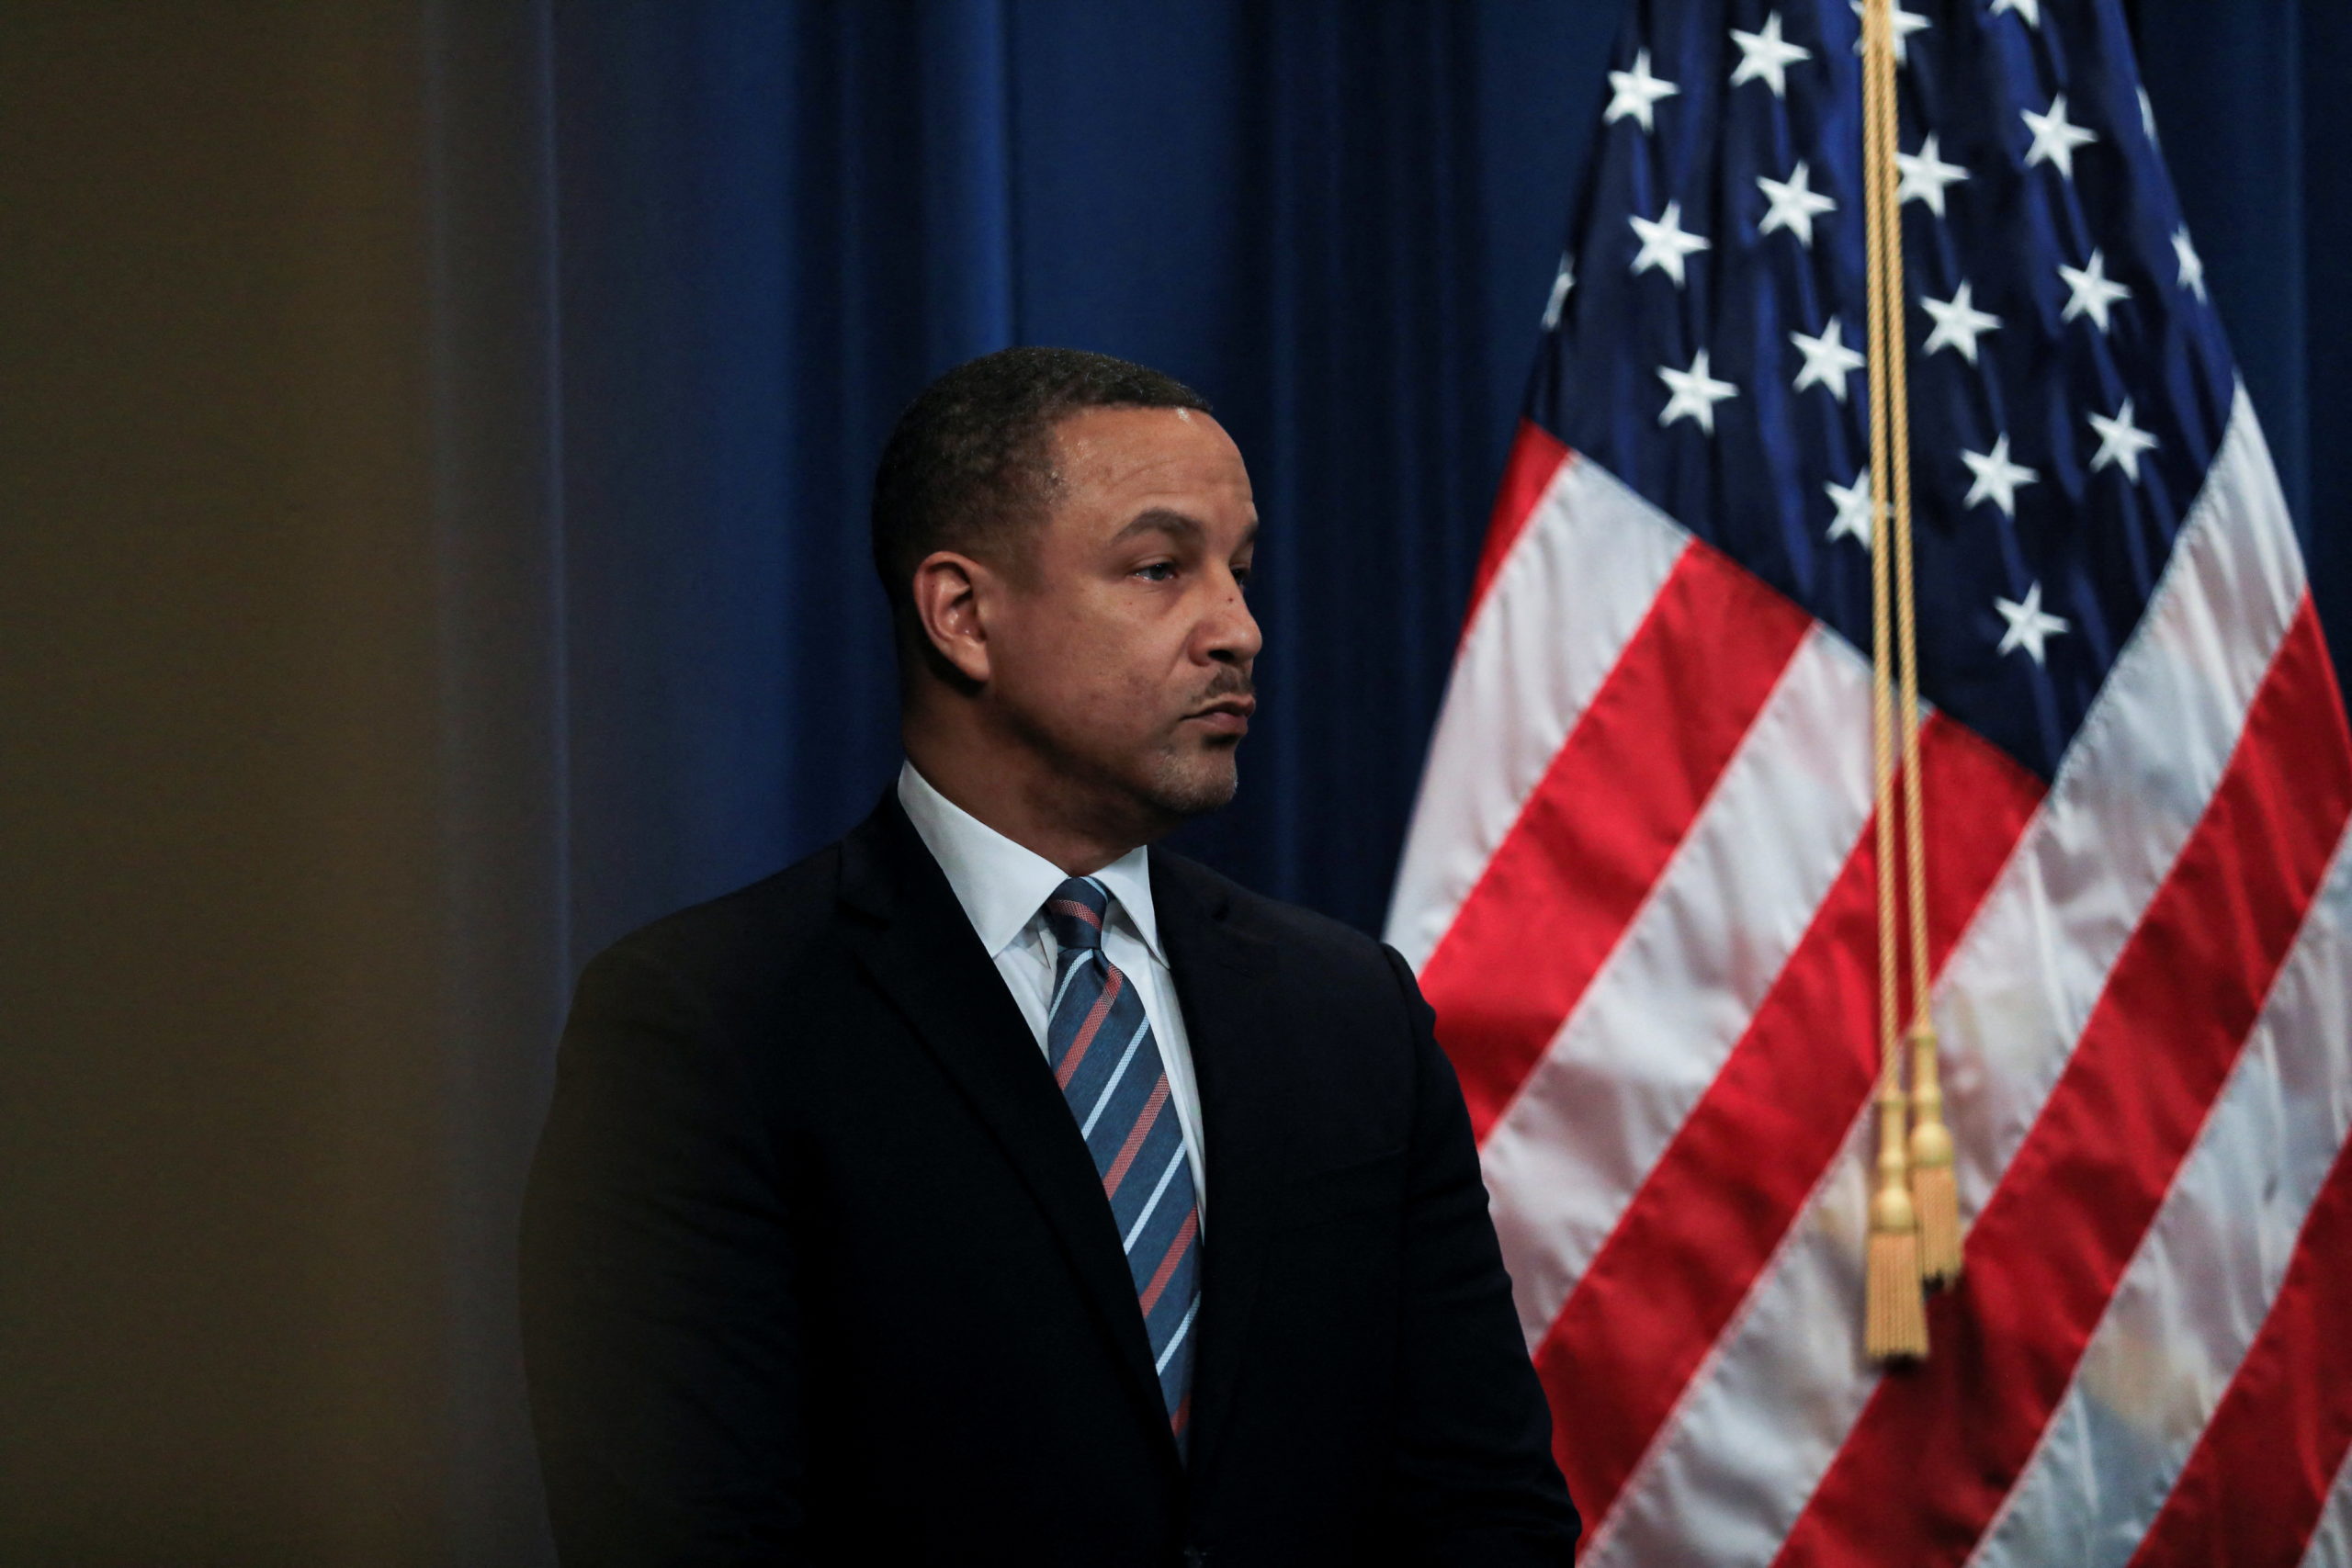 U.S. Attorney for the Eastern District of New York Breon Peace attends a news conference addressing accusations against China of trying to harass and undermine an American critic of China who is currently running for the U.S. Congress, at the Justice Department in Washington, U.S., March 16, 2022. REUTERS/Emily Elconin